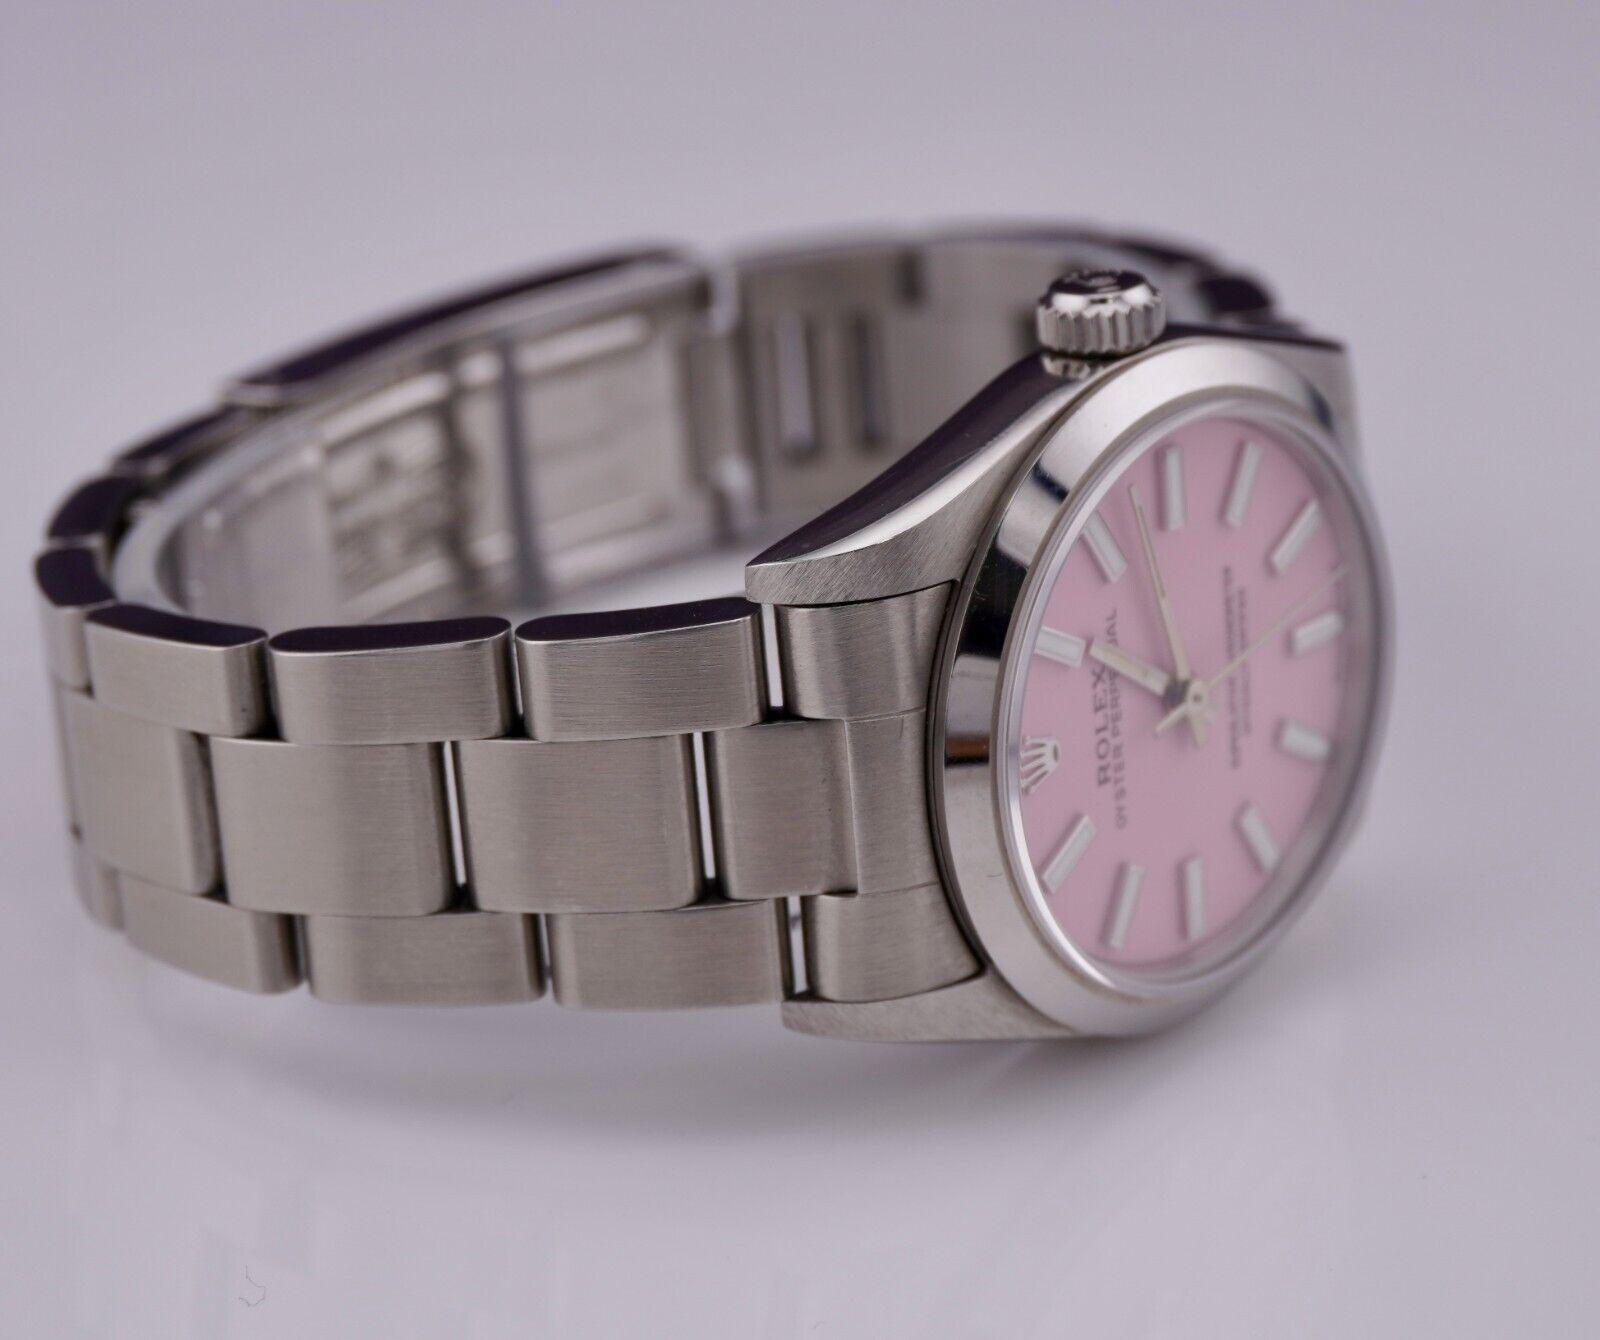 Rolex Oyster Perpetual 31mm Stainless Steel Pink Dial Watch Ref 77080 For Sale 2